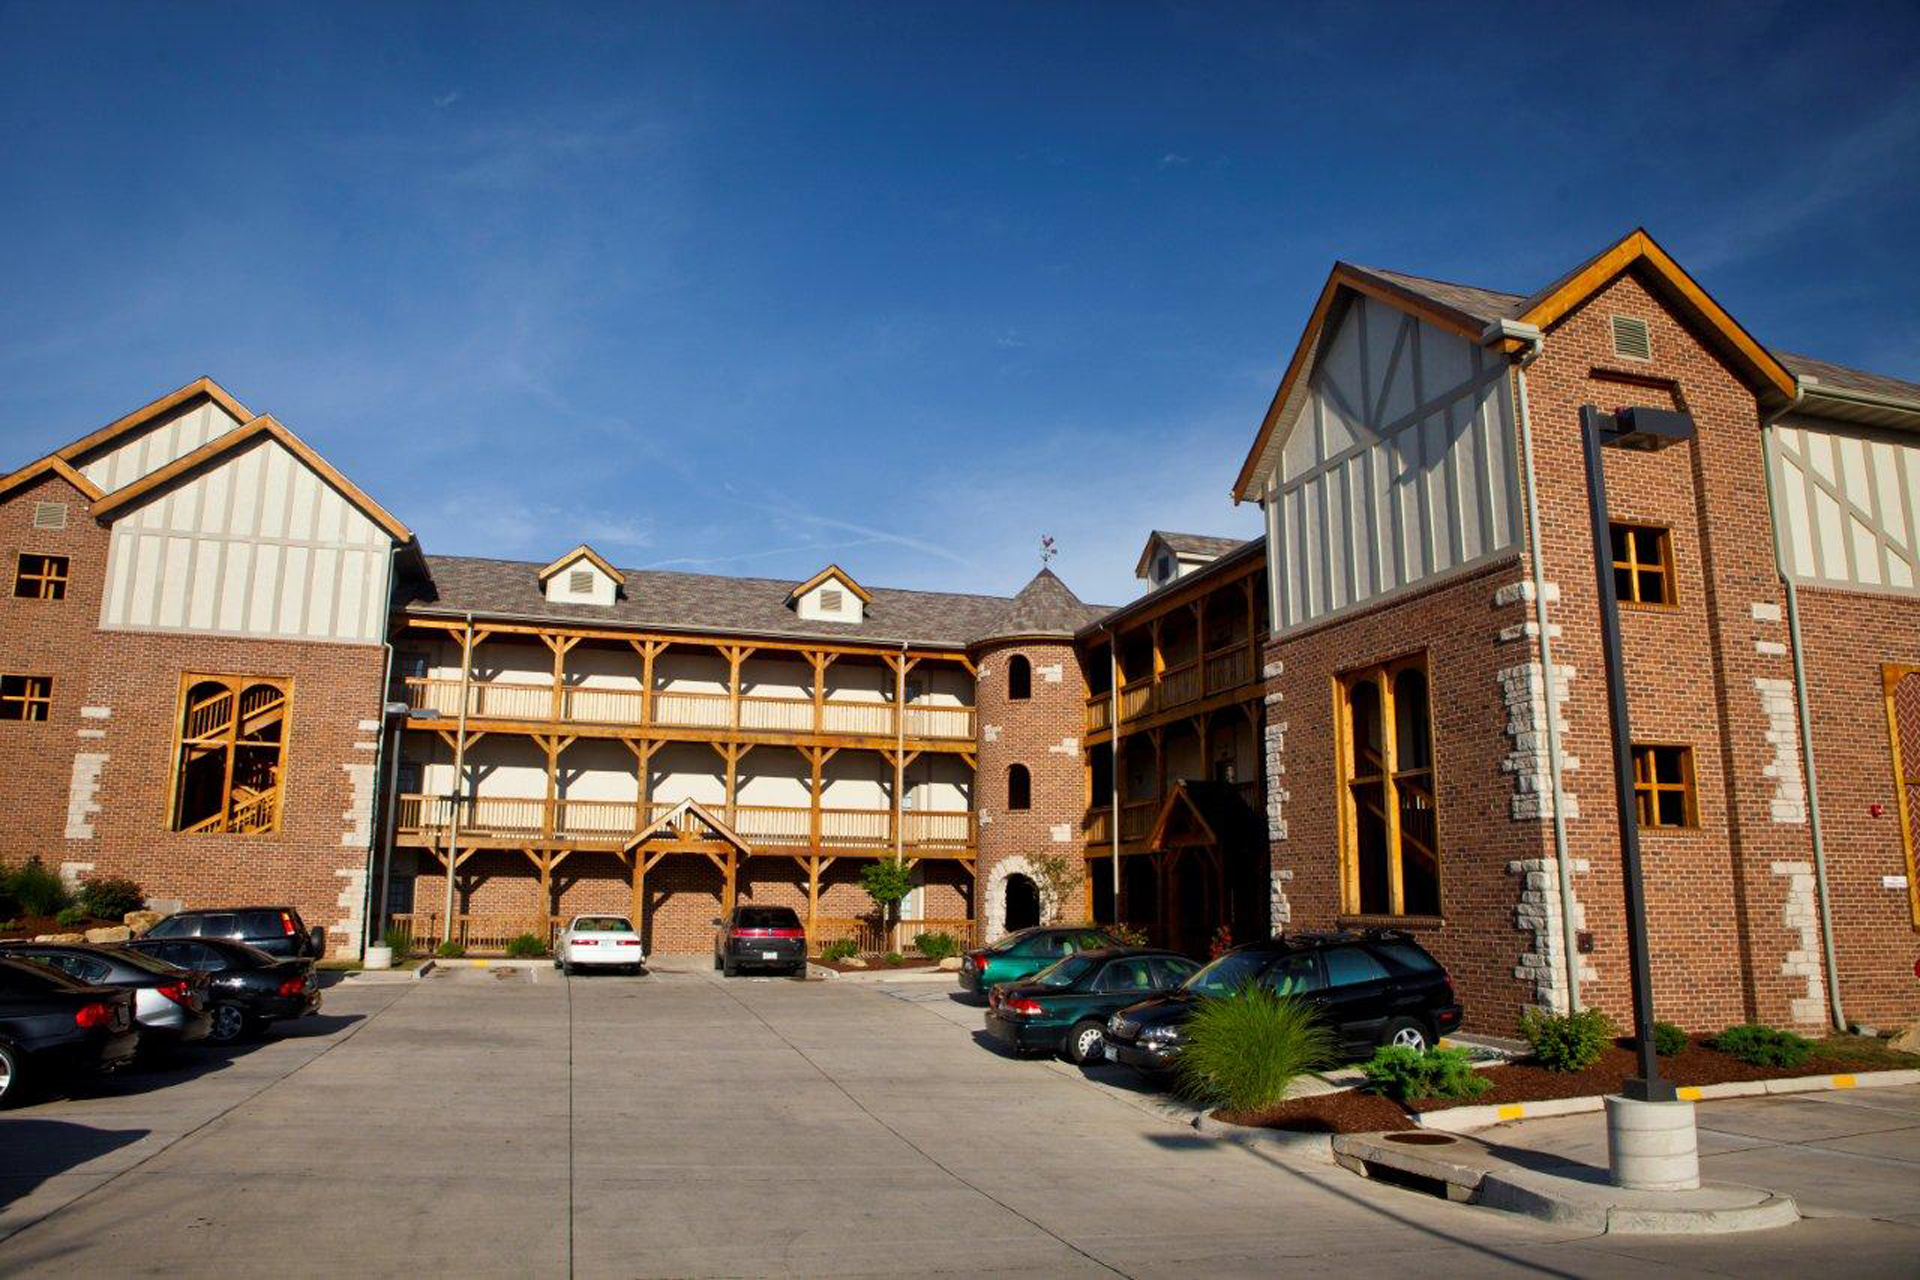 The Lofts at the Manor Are One of Several Columbia, MO Apartment Locations